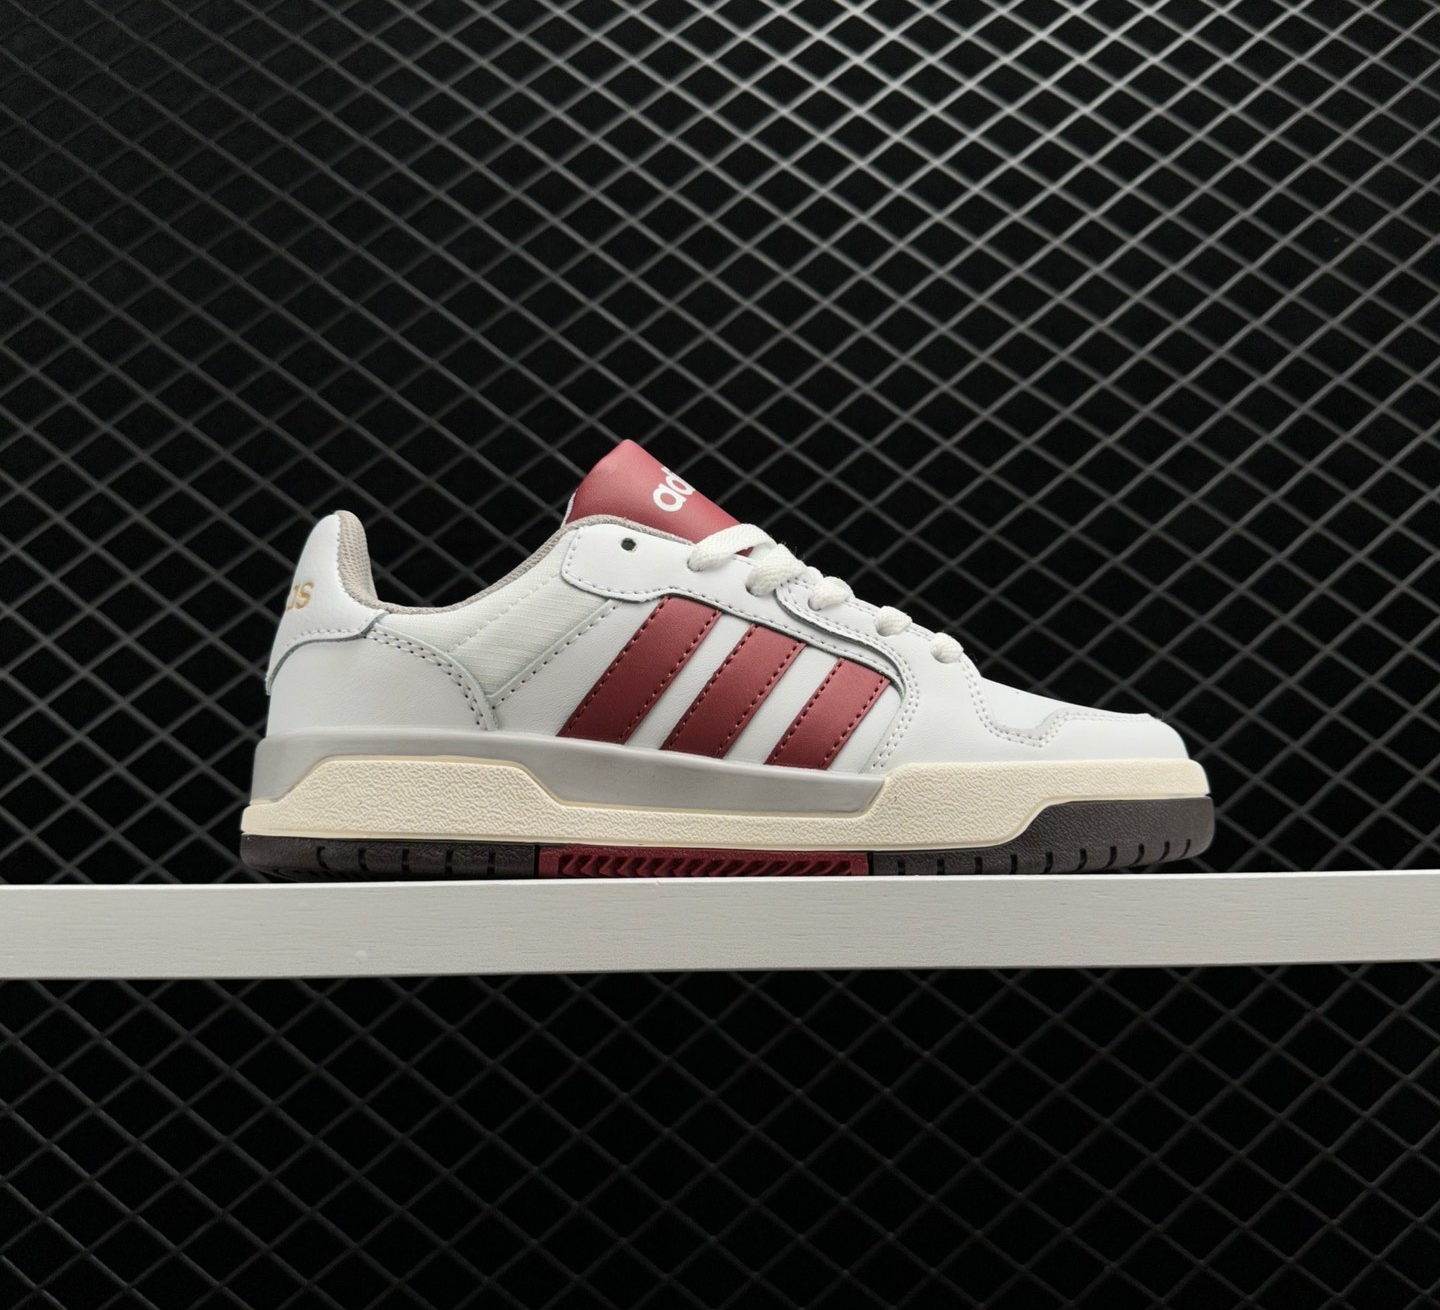 Adidas Neo Entrap White Red FW3462 - Stylish Sneakers with a Pop of Red